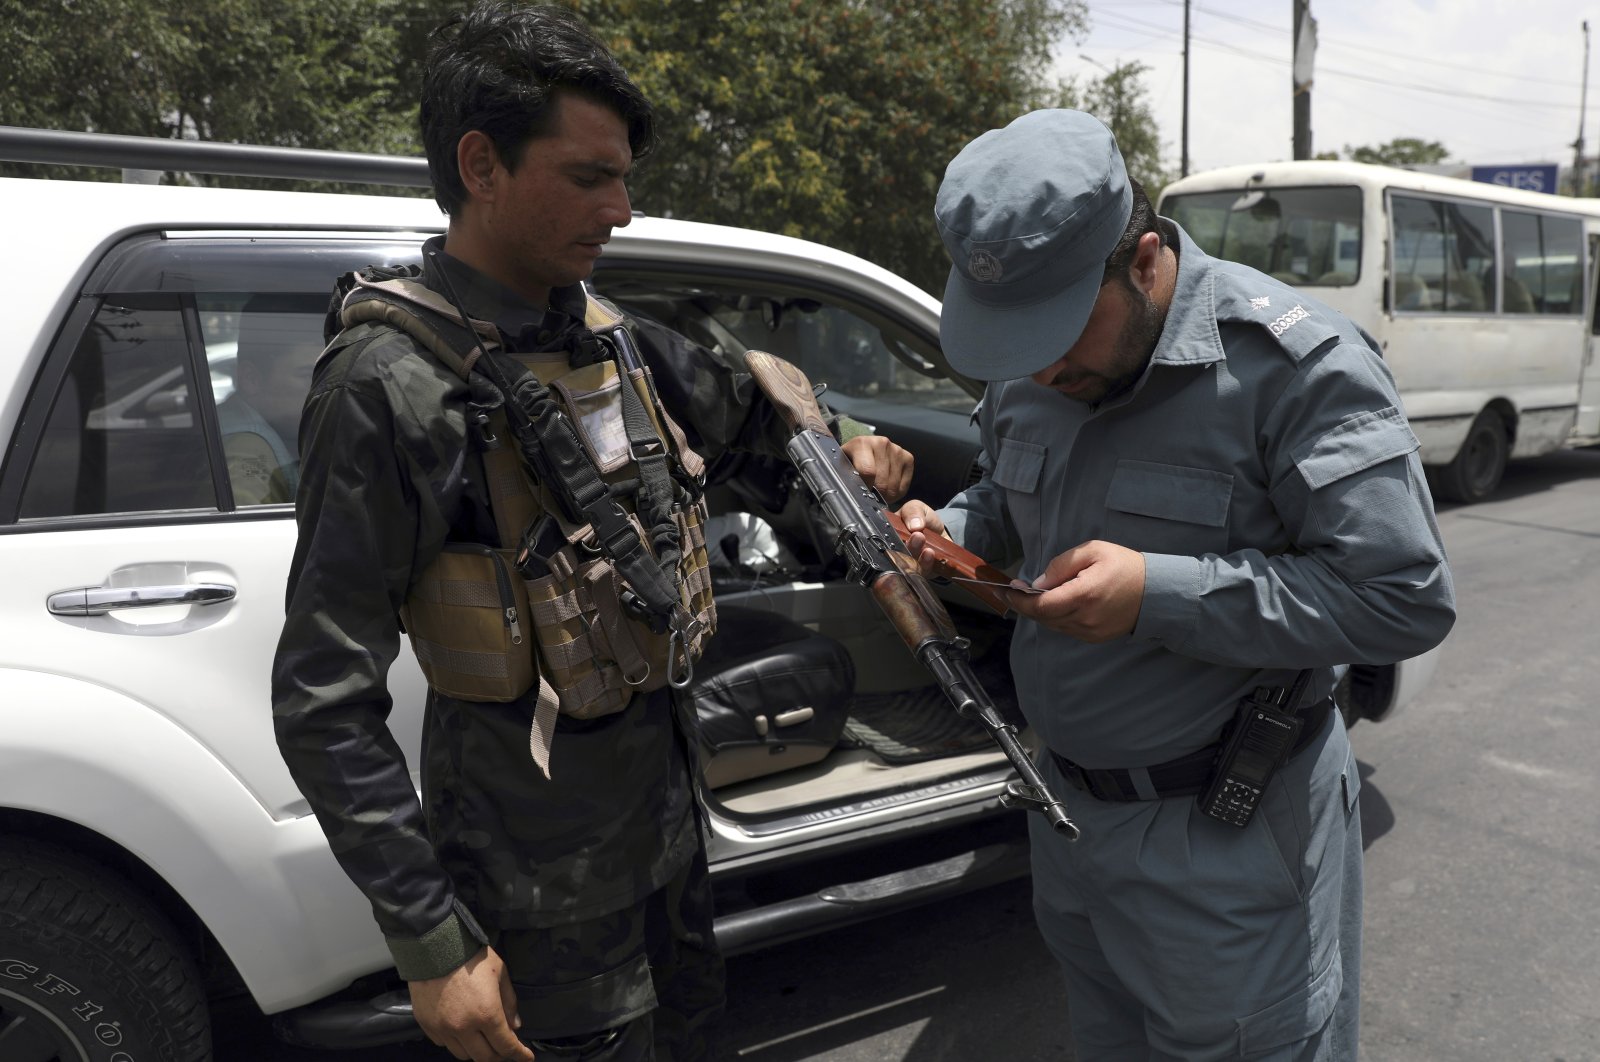 An Afghan police officer checks the documentation of a gun owner, at a temporary checkpoint in Kabul, Afghanistan, July 4, 2021. (AP Photo)